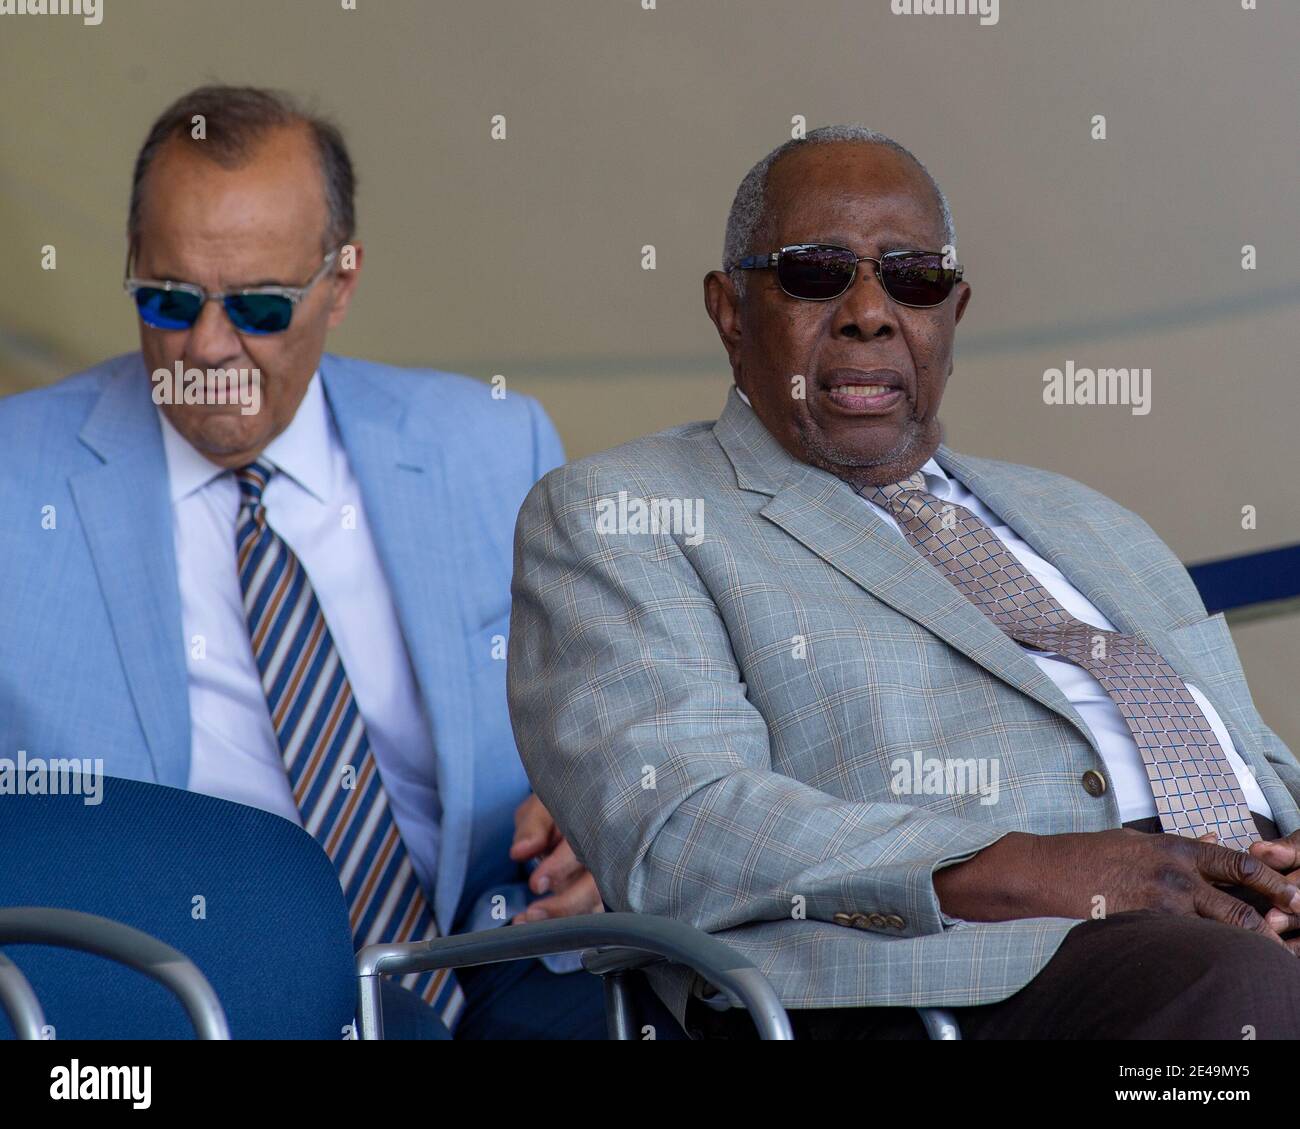 Henry Louis 'Hank' Aaron, Hall of Famer who had 755 career home runs has died at 86. Shown here at the 2019 MLB Cooperstown HOF with Joe Torre Stock Photo